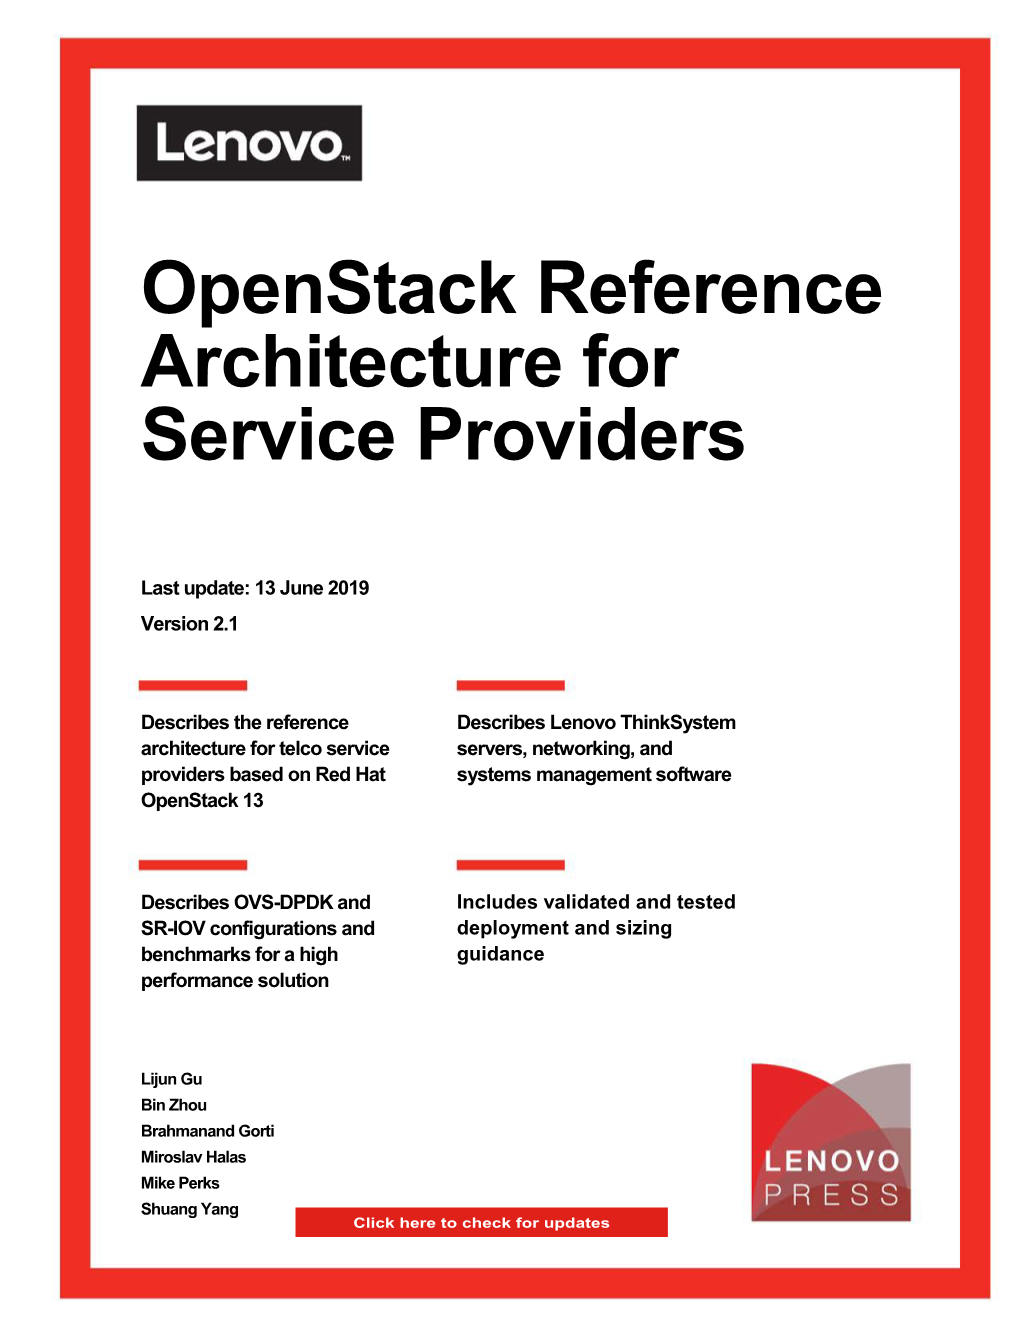 Openstack Reference Architecture for Service Providers